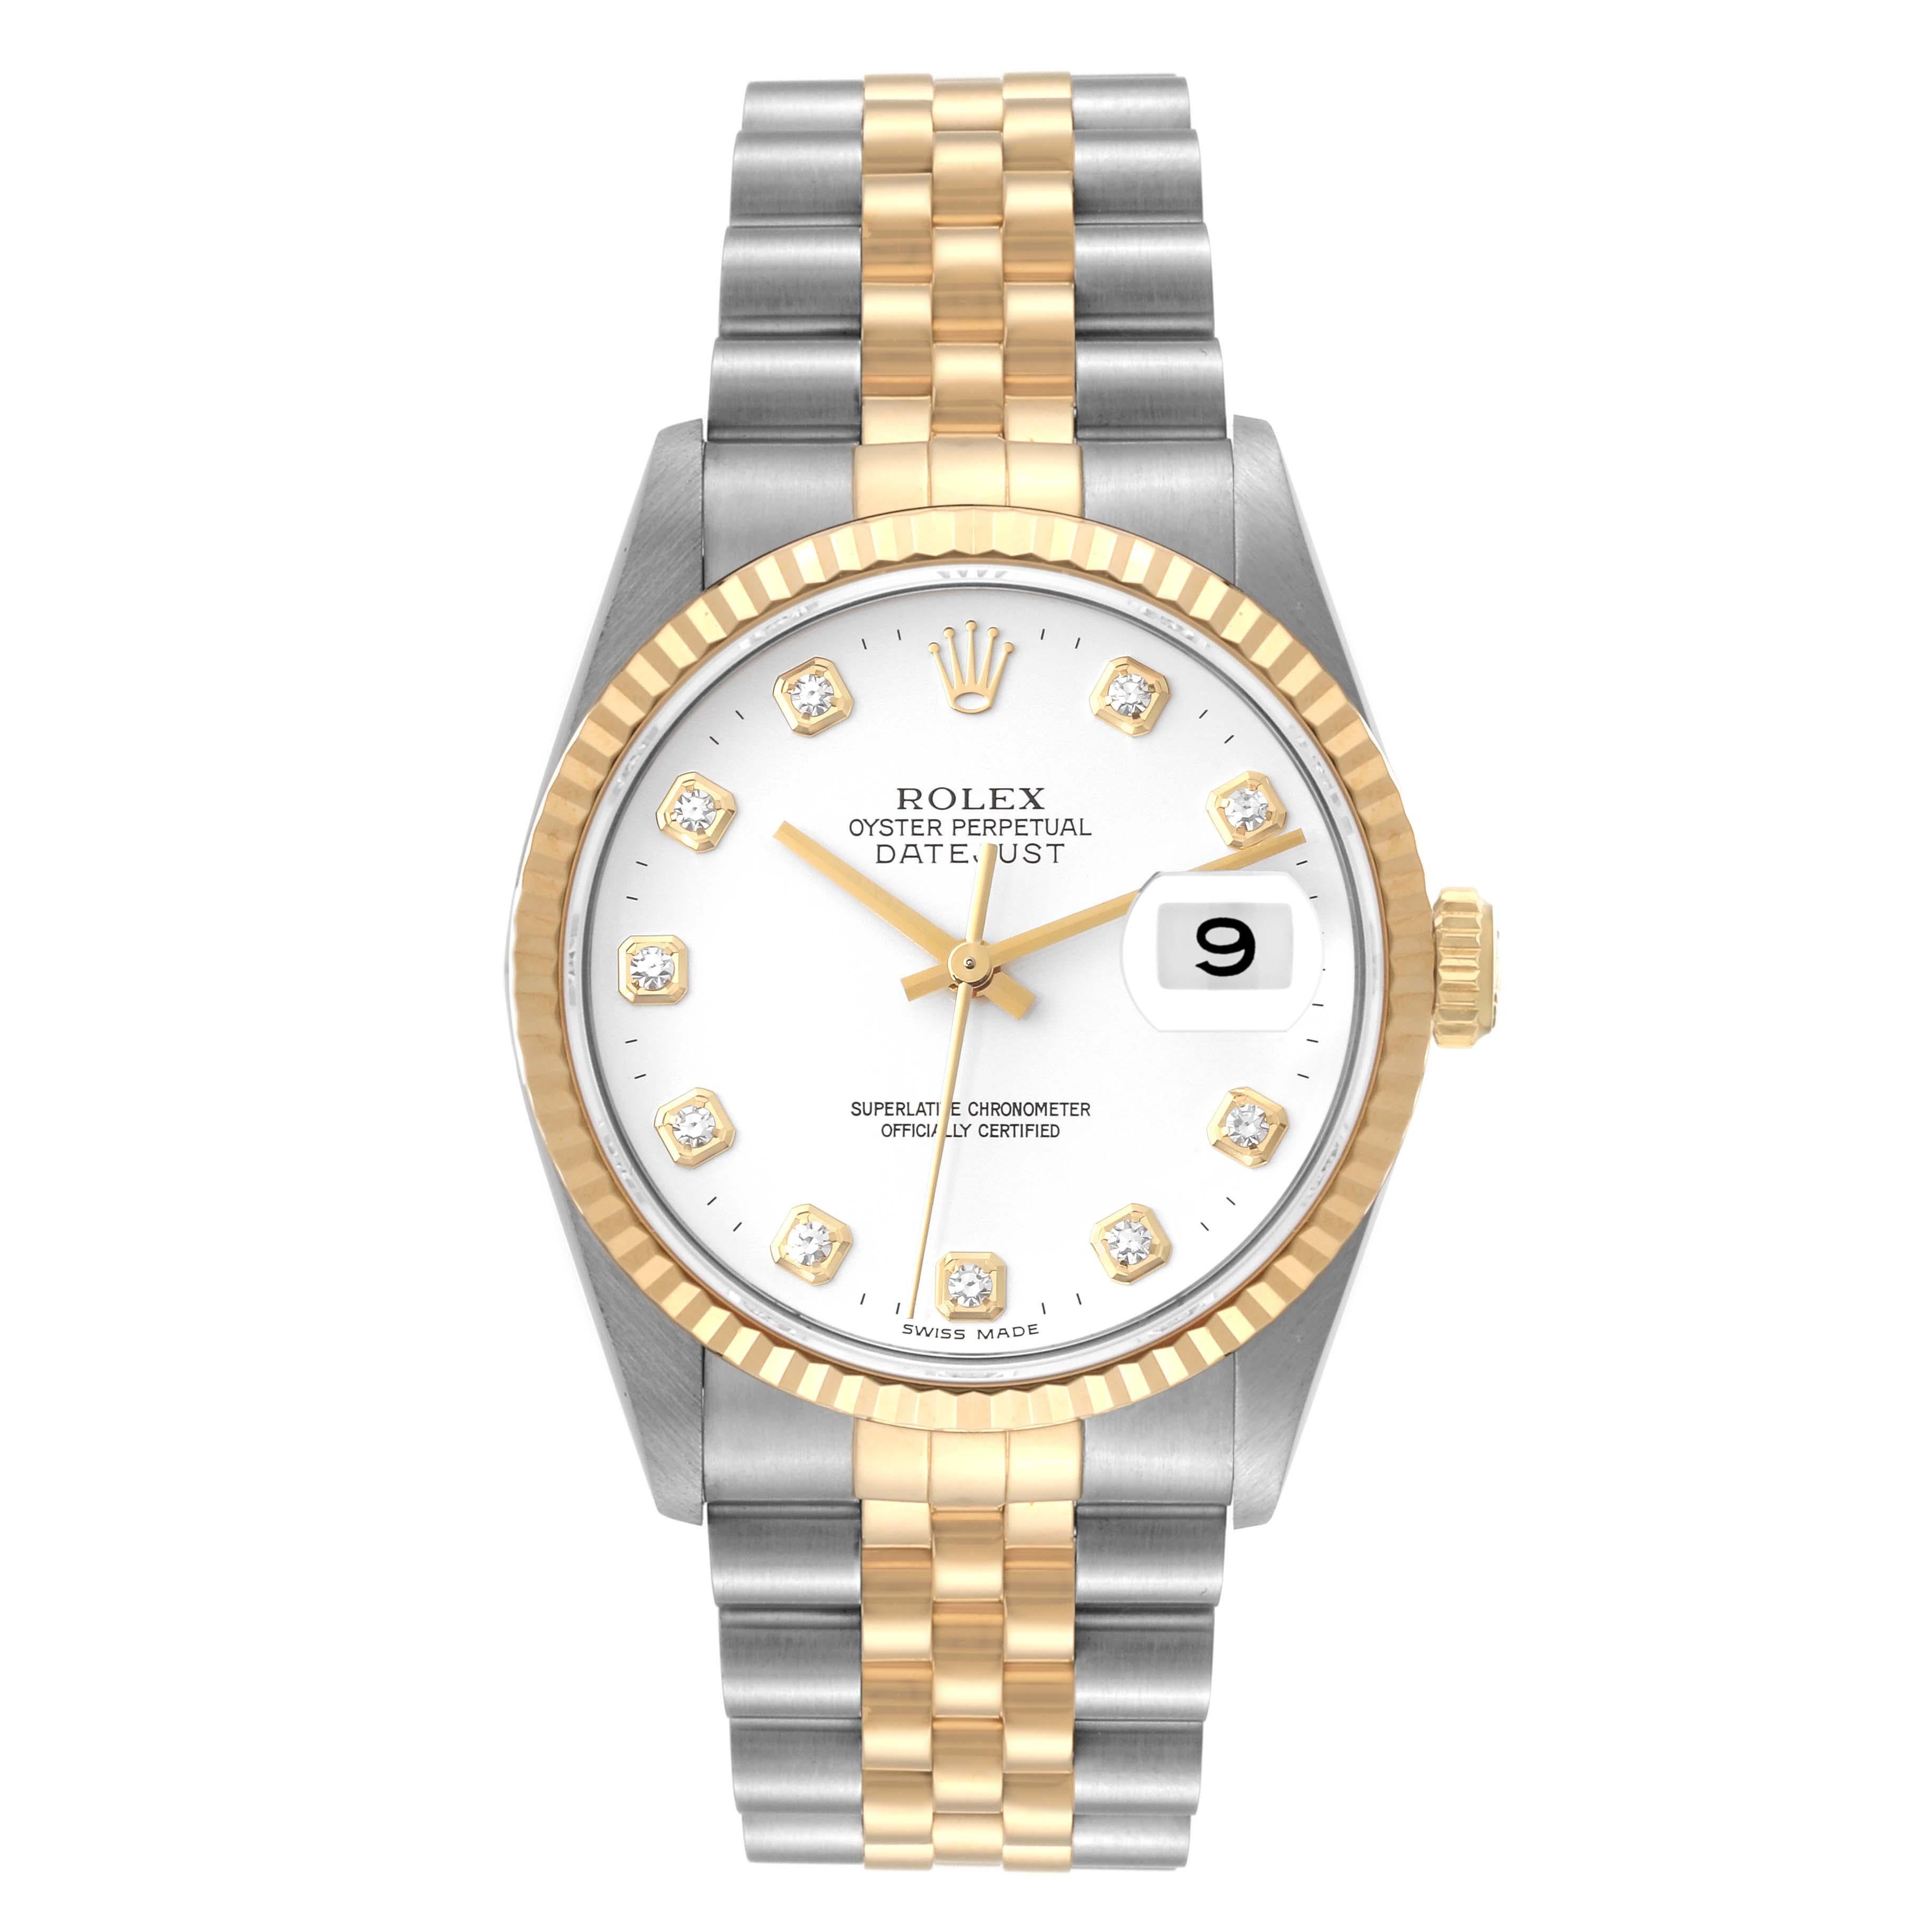 Rolex Datejust White Diamond Dial Steel Yellow Gold Mens Watch 16233. Officially certified chronometer automatic self-winding movement. Stainless steel case 36 mm in diameter.  Rolex logo on an 18K yellow gold crown. 18k yellow gold fluted bezel.